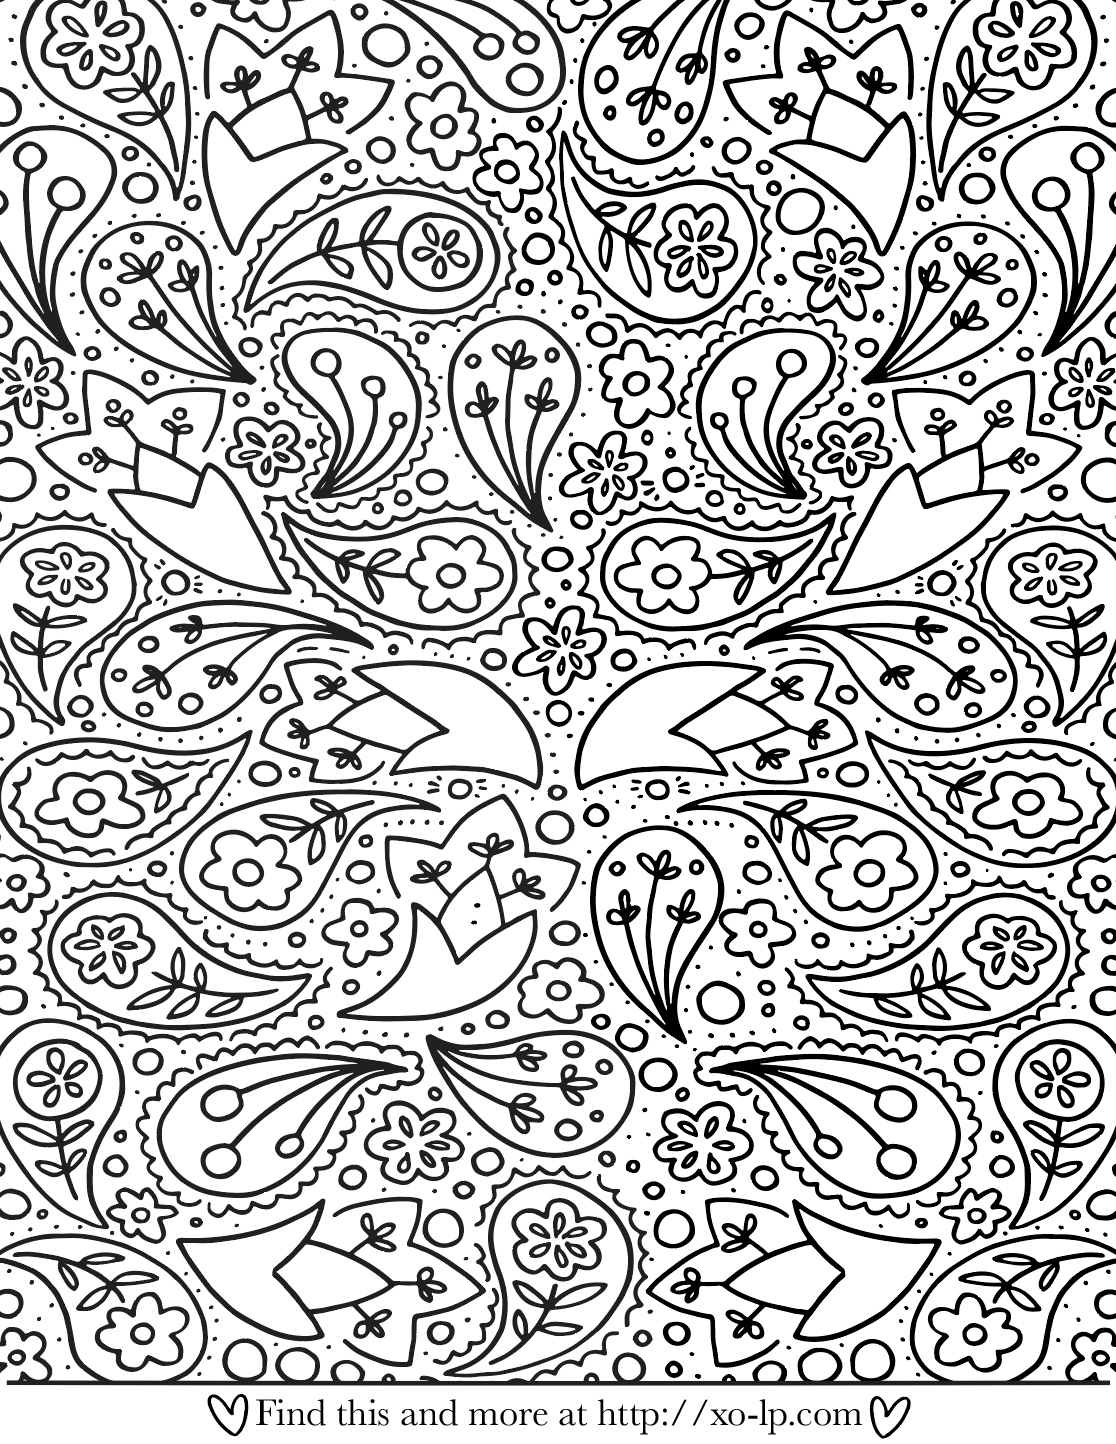 Printable Coloring Pages — XO-LP